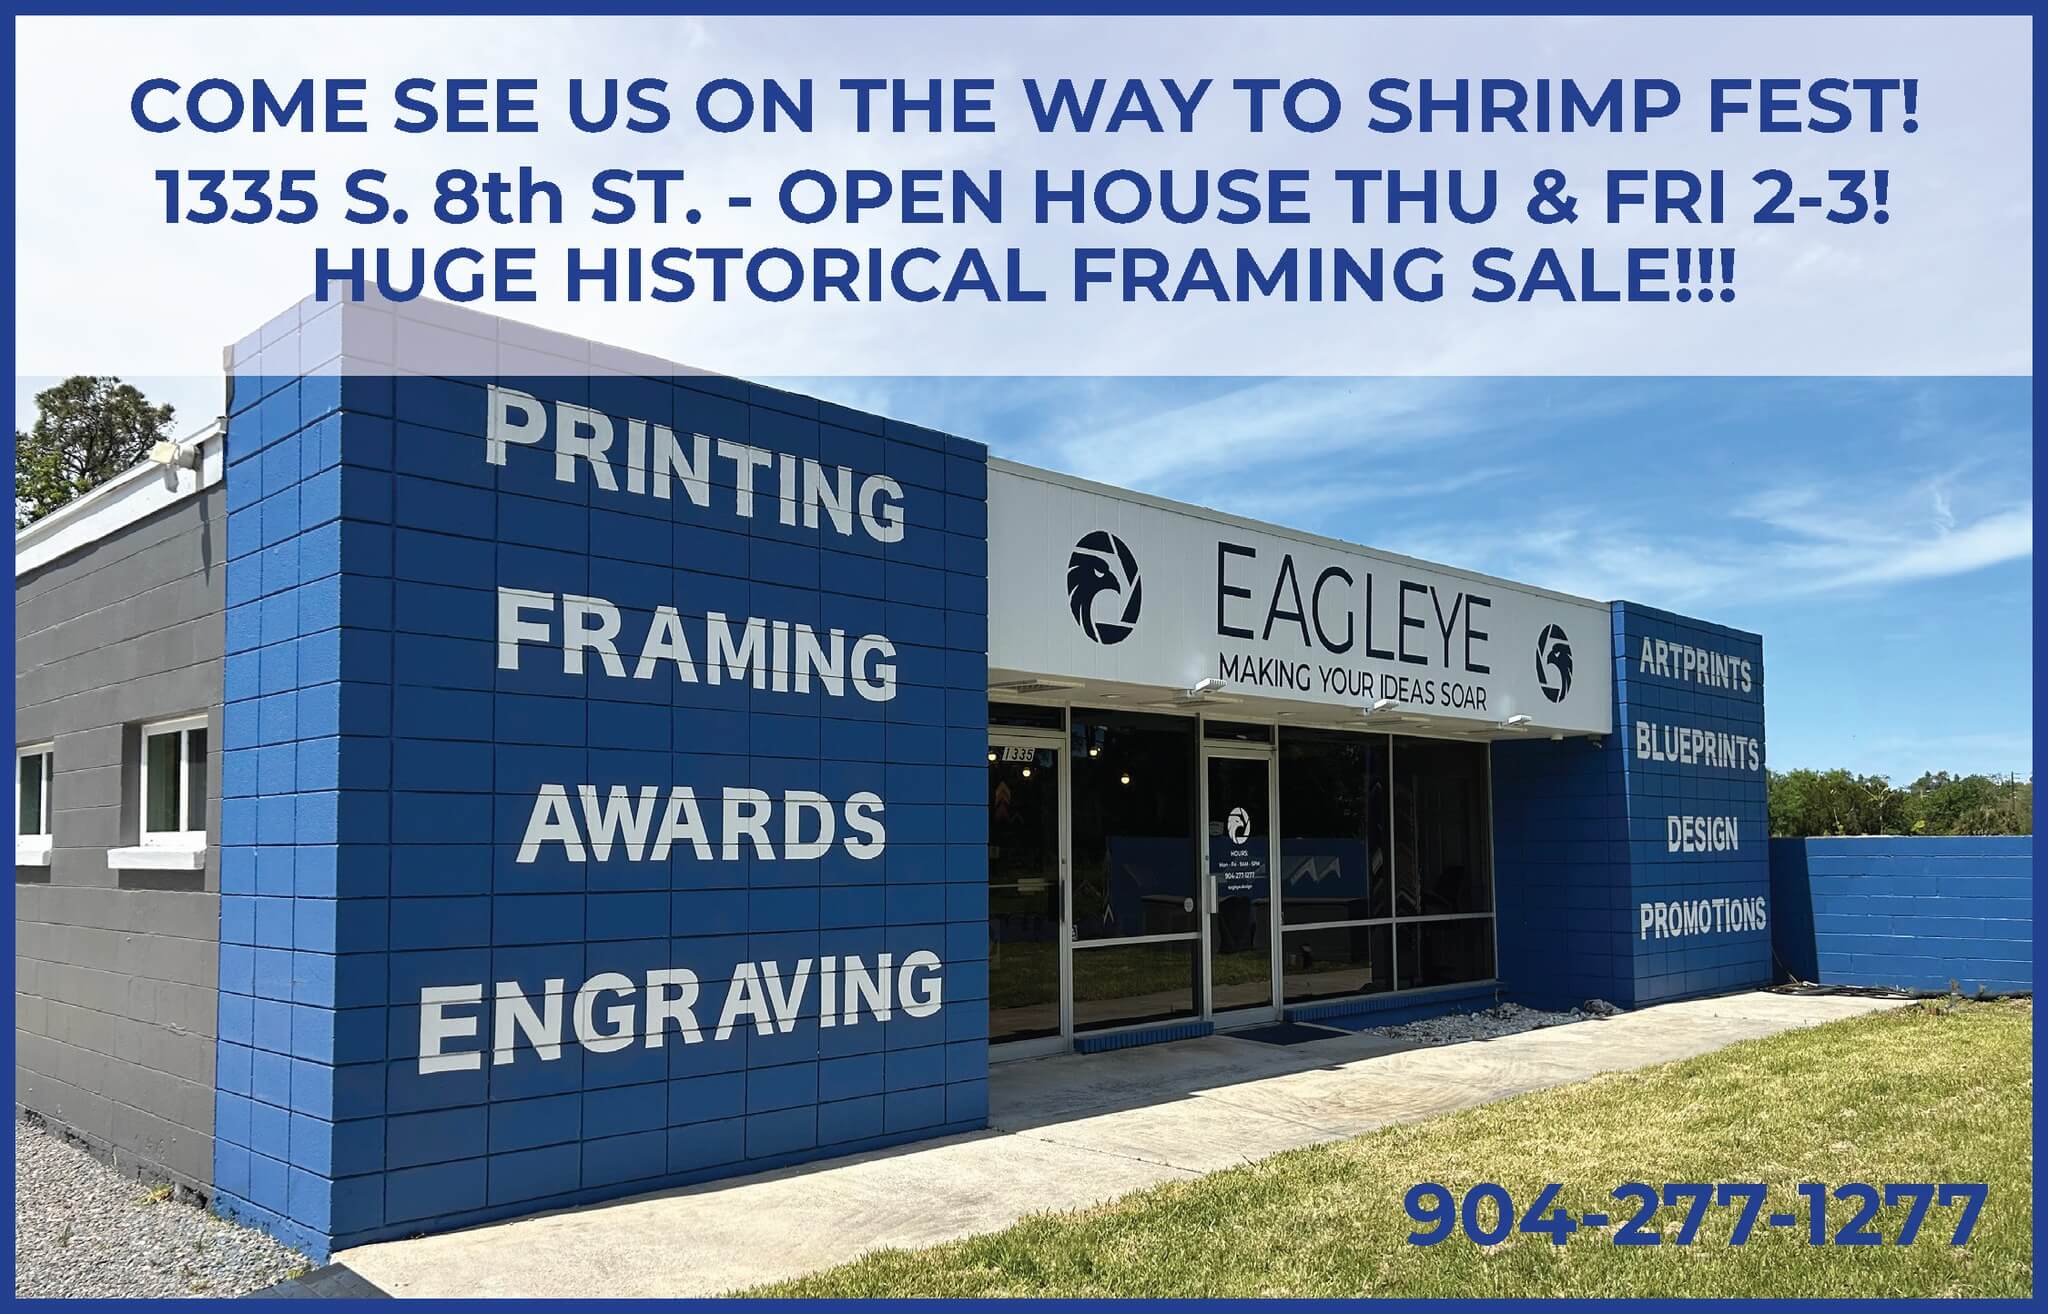 Eagleye Printing Framing and More Open House